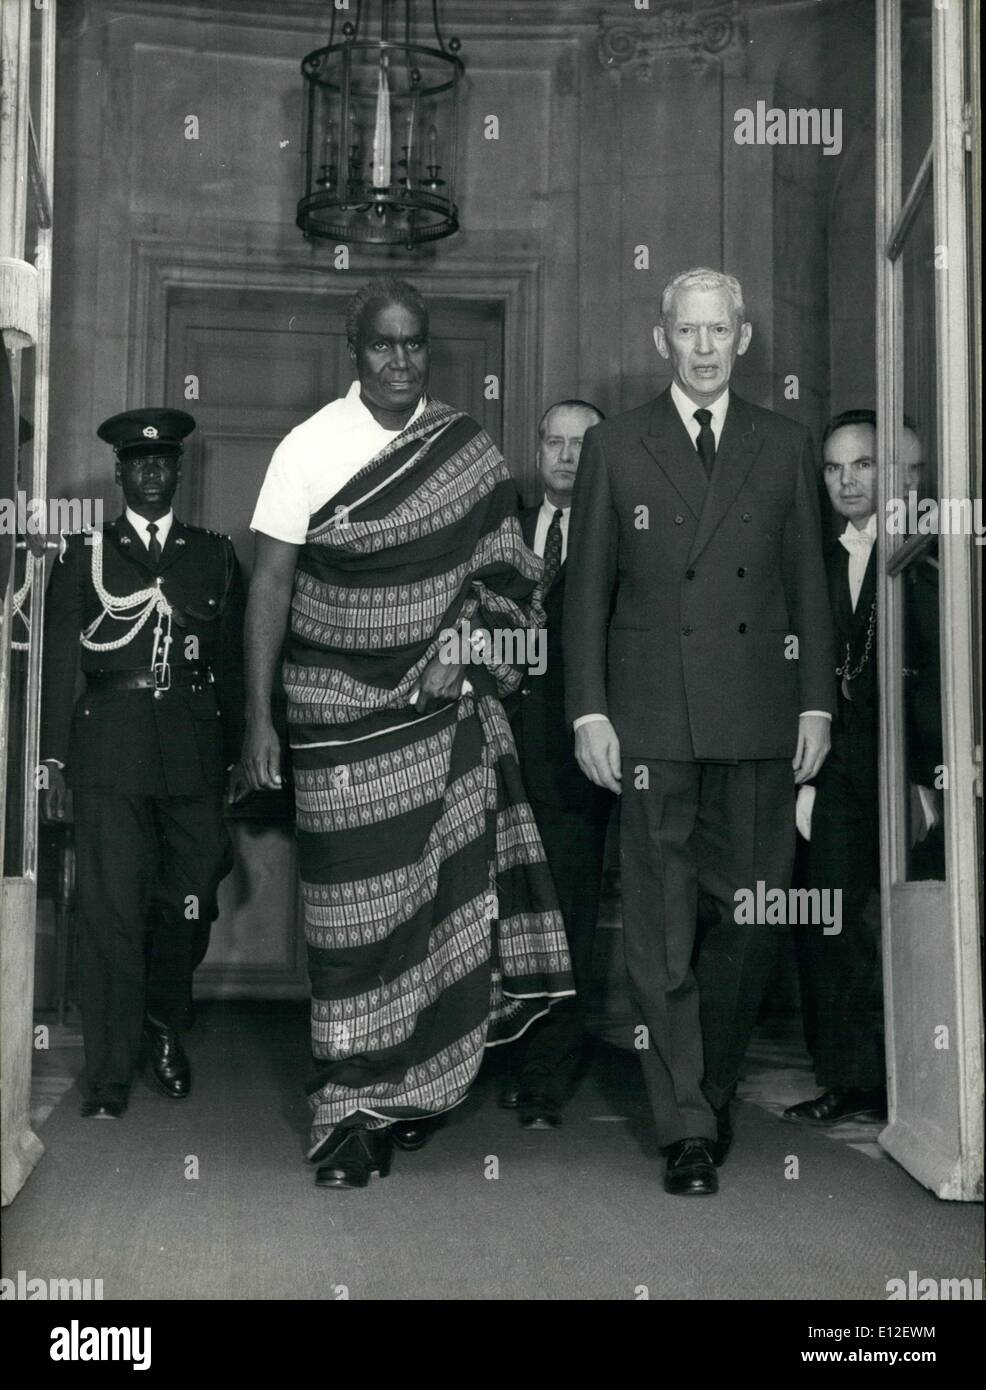 Dec. 21, 2011 - President of Zambia of Visit To Paris M. Kaunda, President of Zambia, Is now on Official Visit to Paris. OPS:- M. Kaunia Pictured WIth Prime Minister Couve De Murville After the Take he Had with him This Morning. Stock Photo